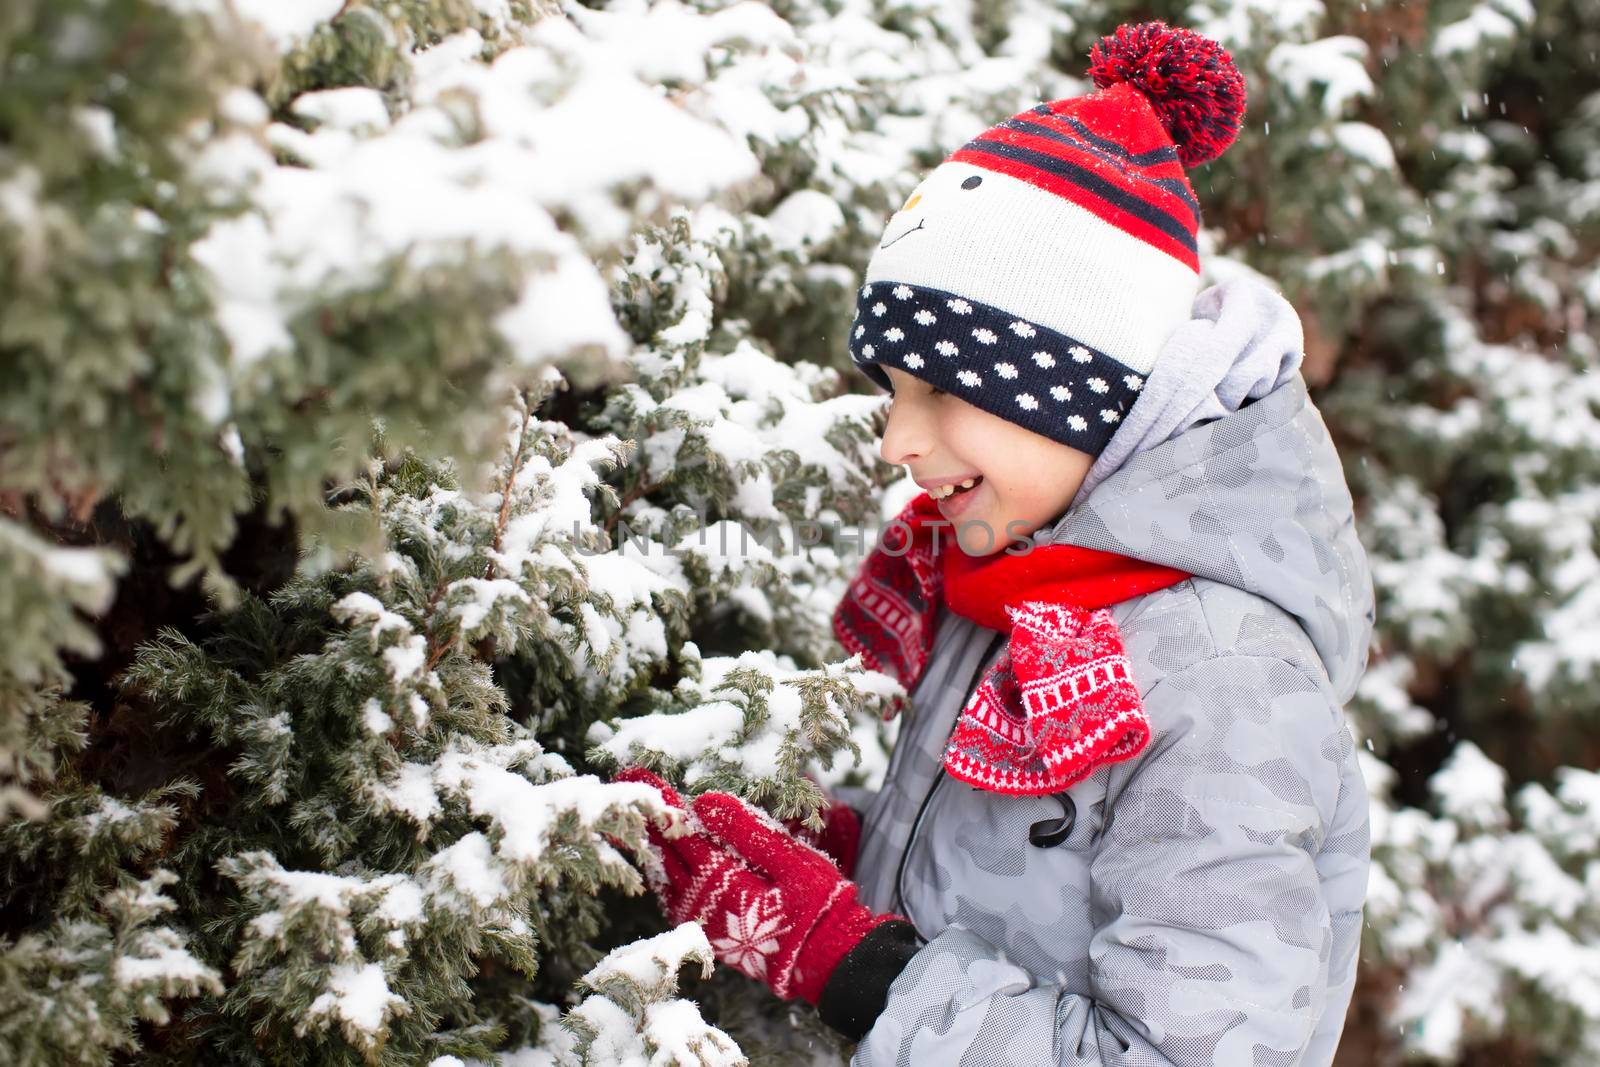 Child in winter. A little boy rejoices in the snow on the Christmas tree.